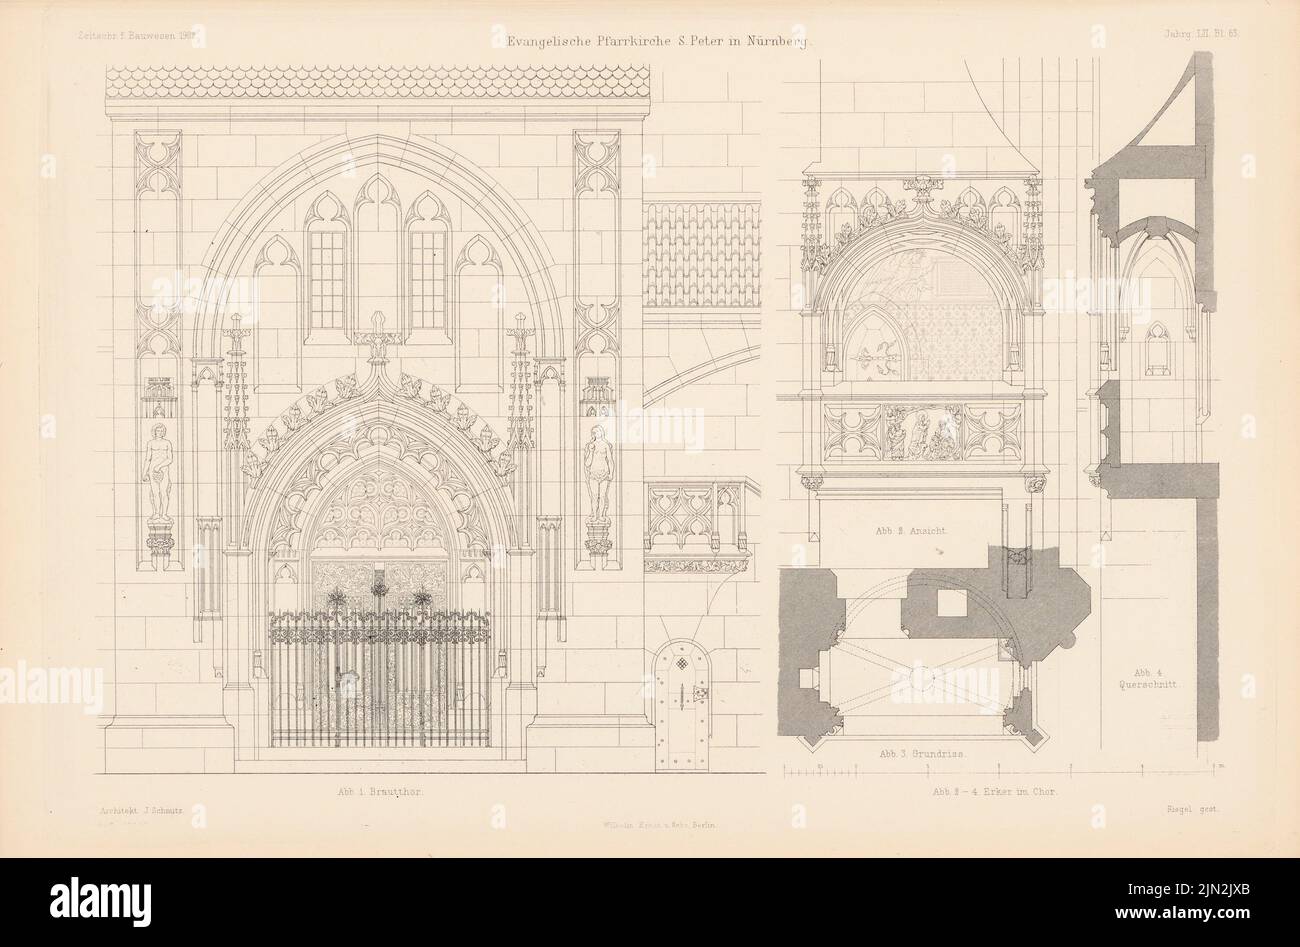 Schmitz Josef (1860-1936), St. Peter, Nuremberg. (From: Atlas to the magazine for Building, ed. V. Ministry of Public Work, Jg. 52, 1902): Views BrauTtor, Erker in the choir, cross -section, floor plan. Stitch on paper, 29.9 x 45.3 cm (including scan edges) Stock Photo